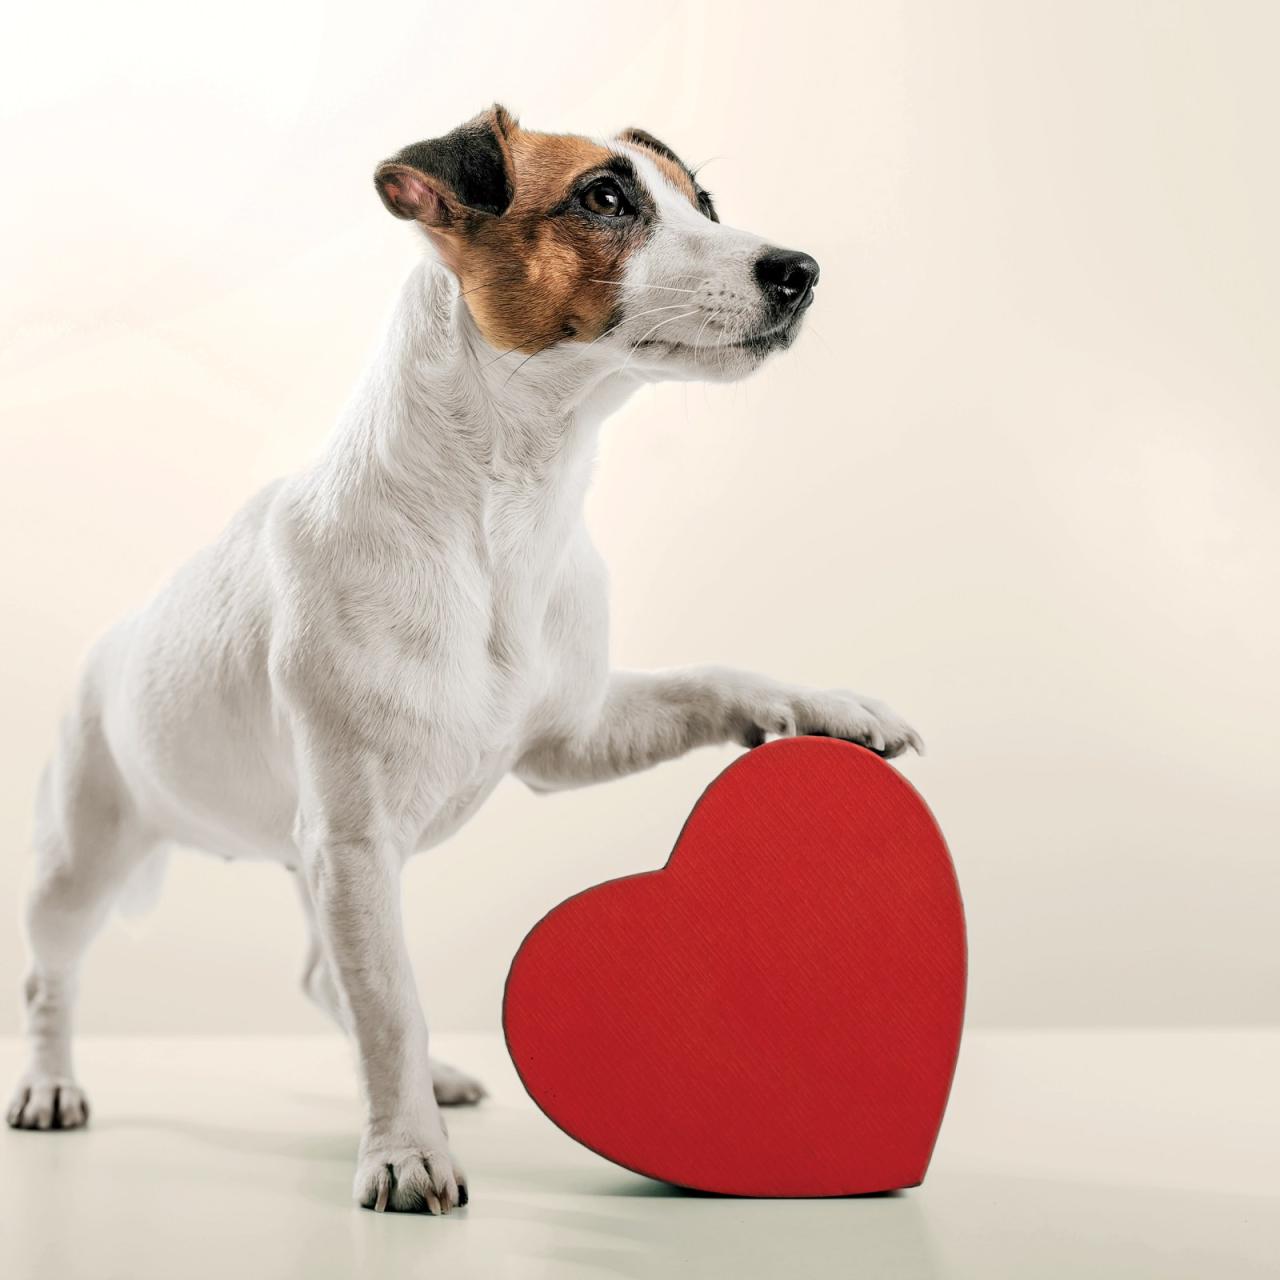 Does Your Dog Truly Love You? Science Has The Answer